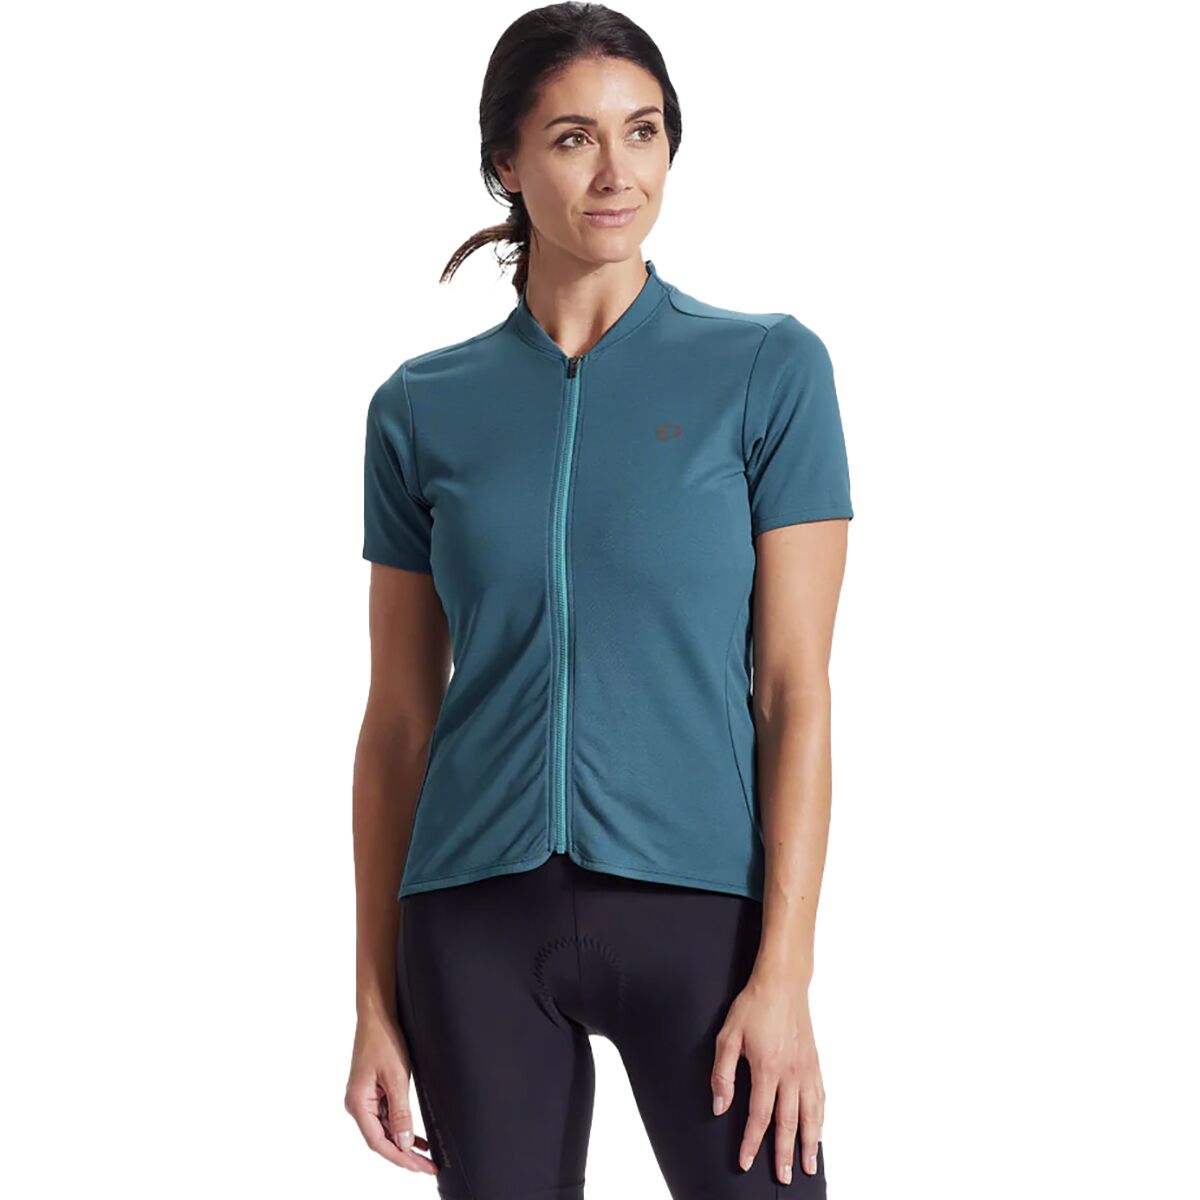 Machines for Freedom Everyday Short-Sleeve Jersey - Women's Kelly Green, XL